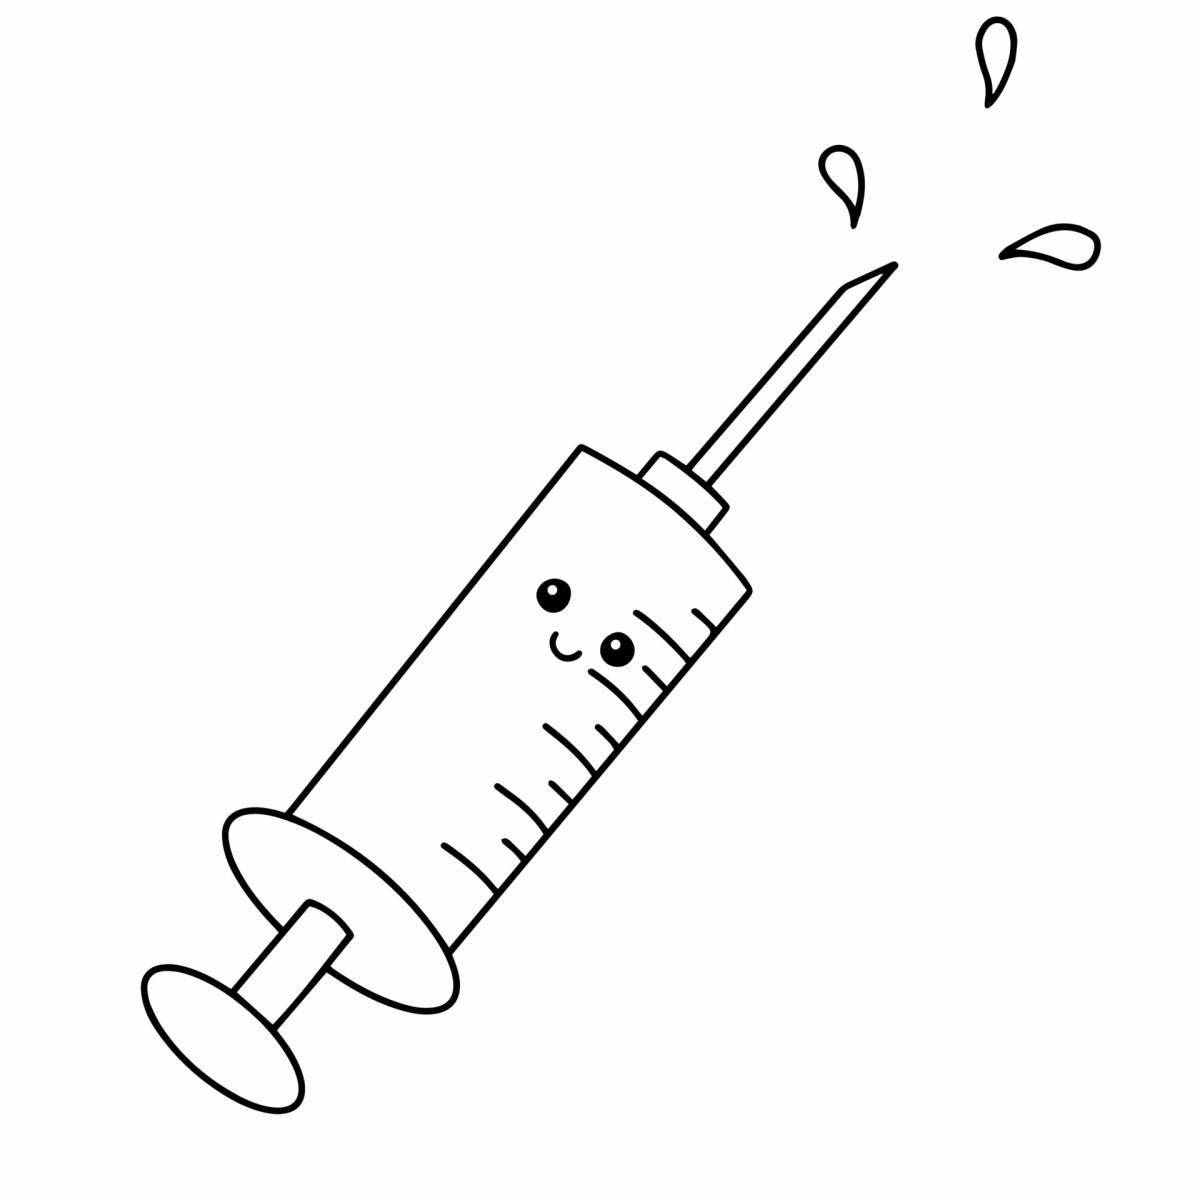 Impressive syringe with needle coloring page